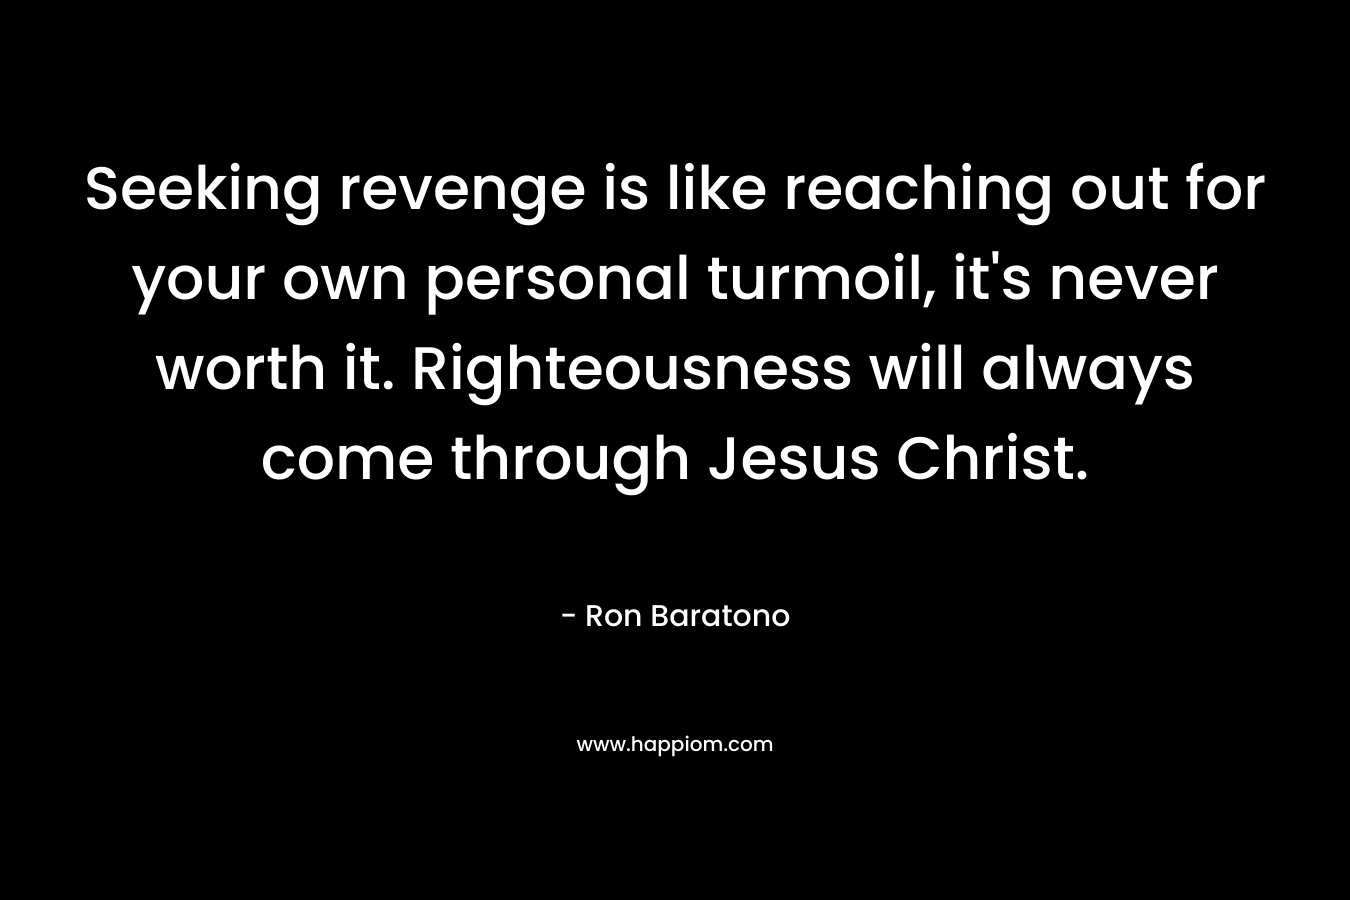 Seeking revenge is like reaching out for your own personal turmoil, it's never worth it. Righteousness will always come through Jesus Christ.